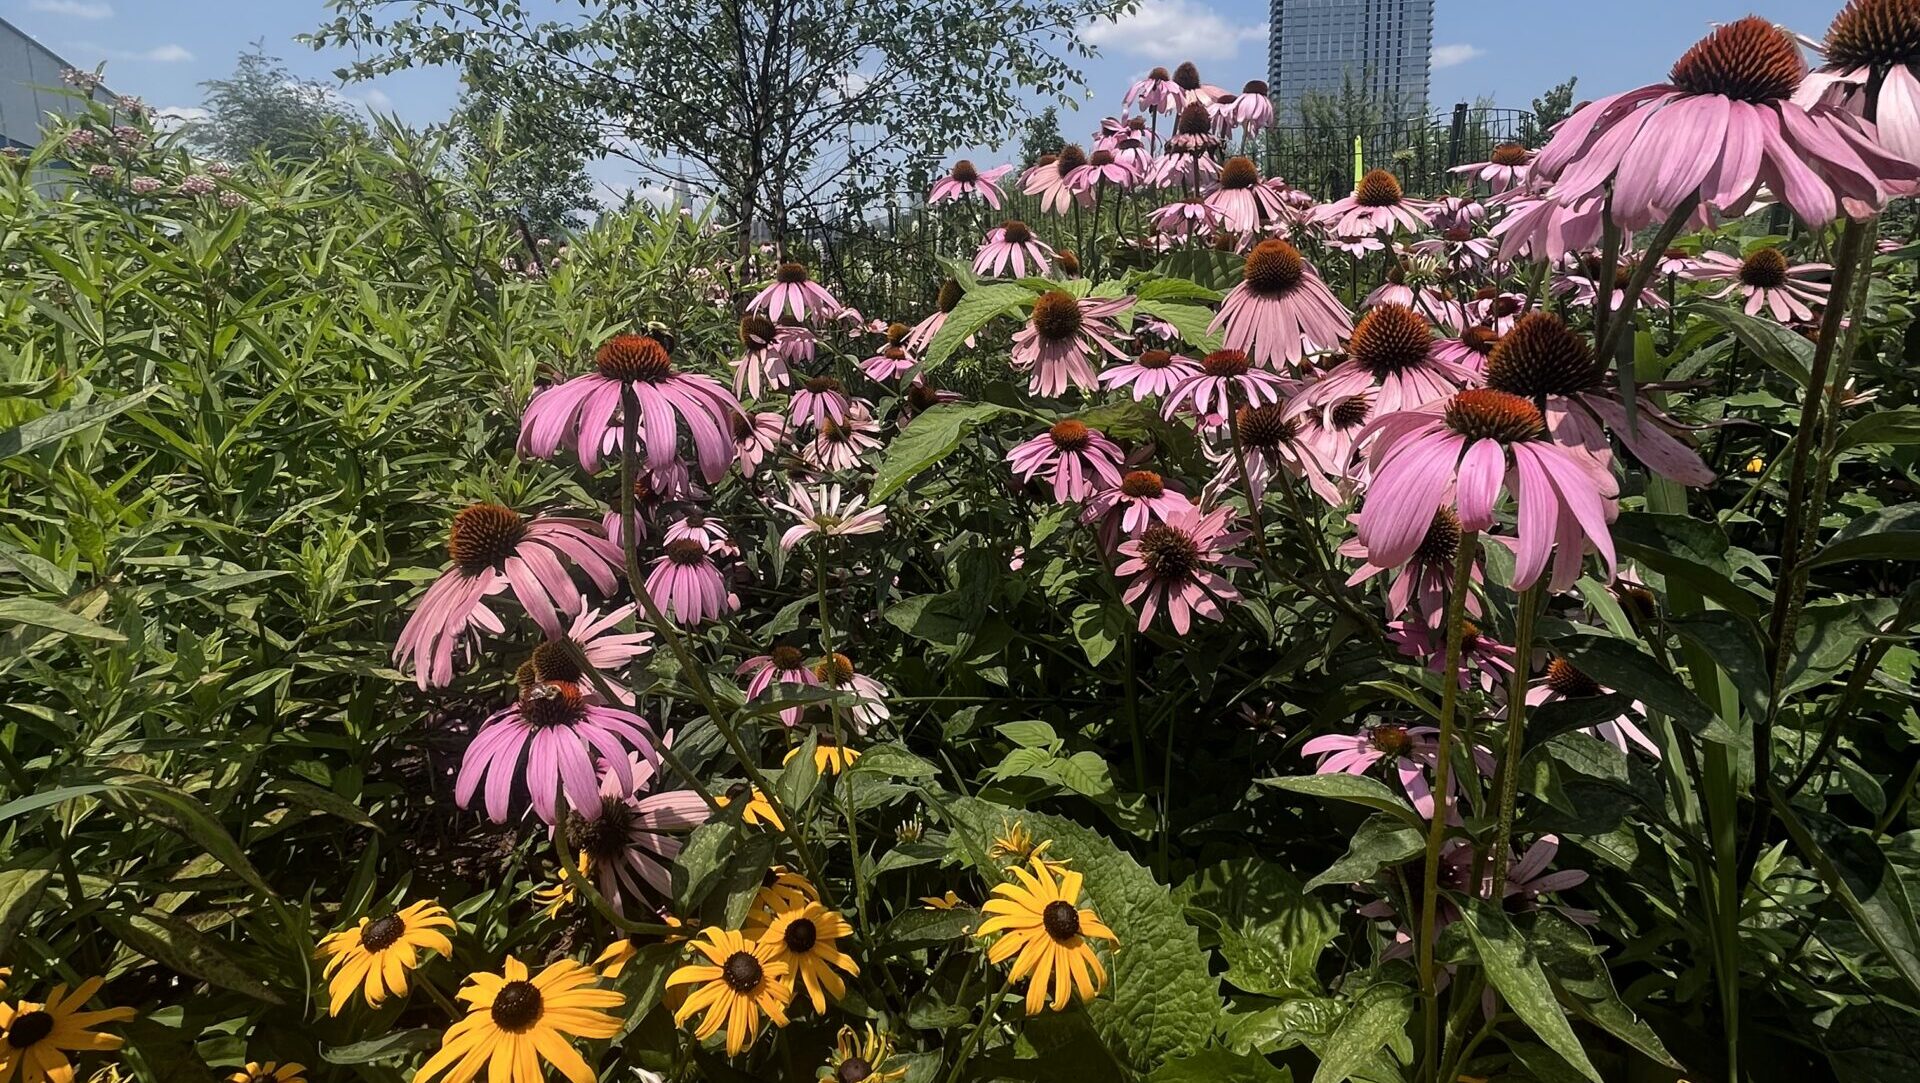 Purple coneflowers and Black-eyed Susans